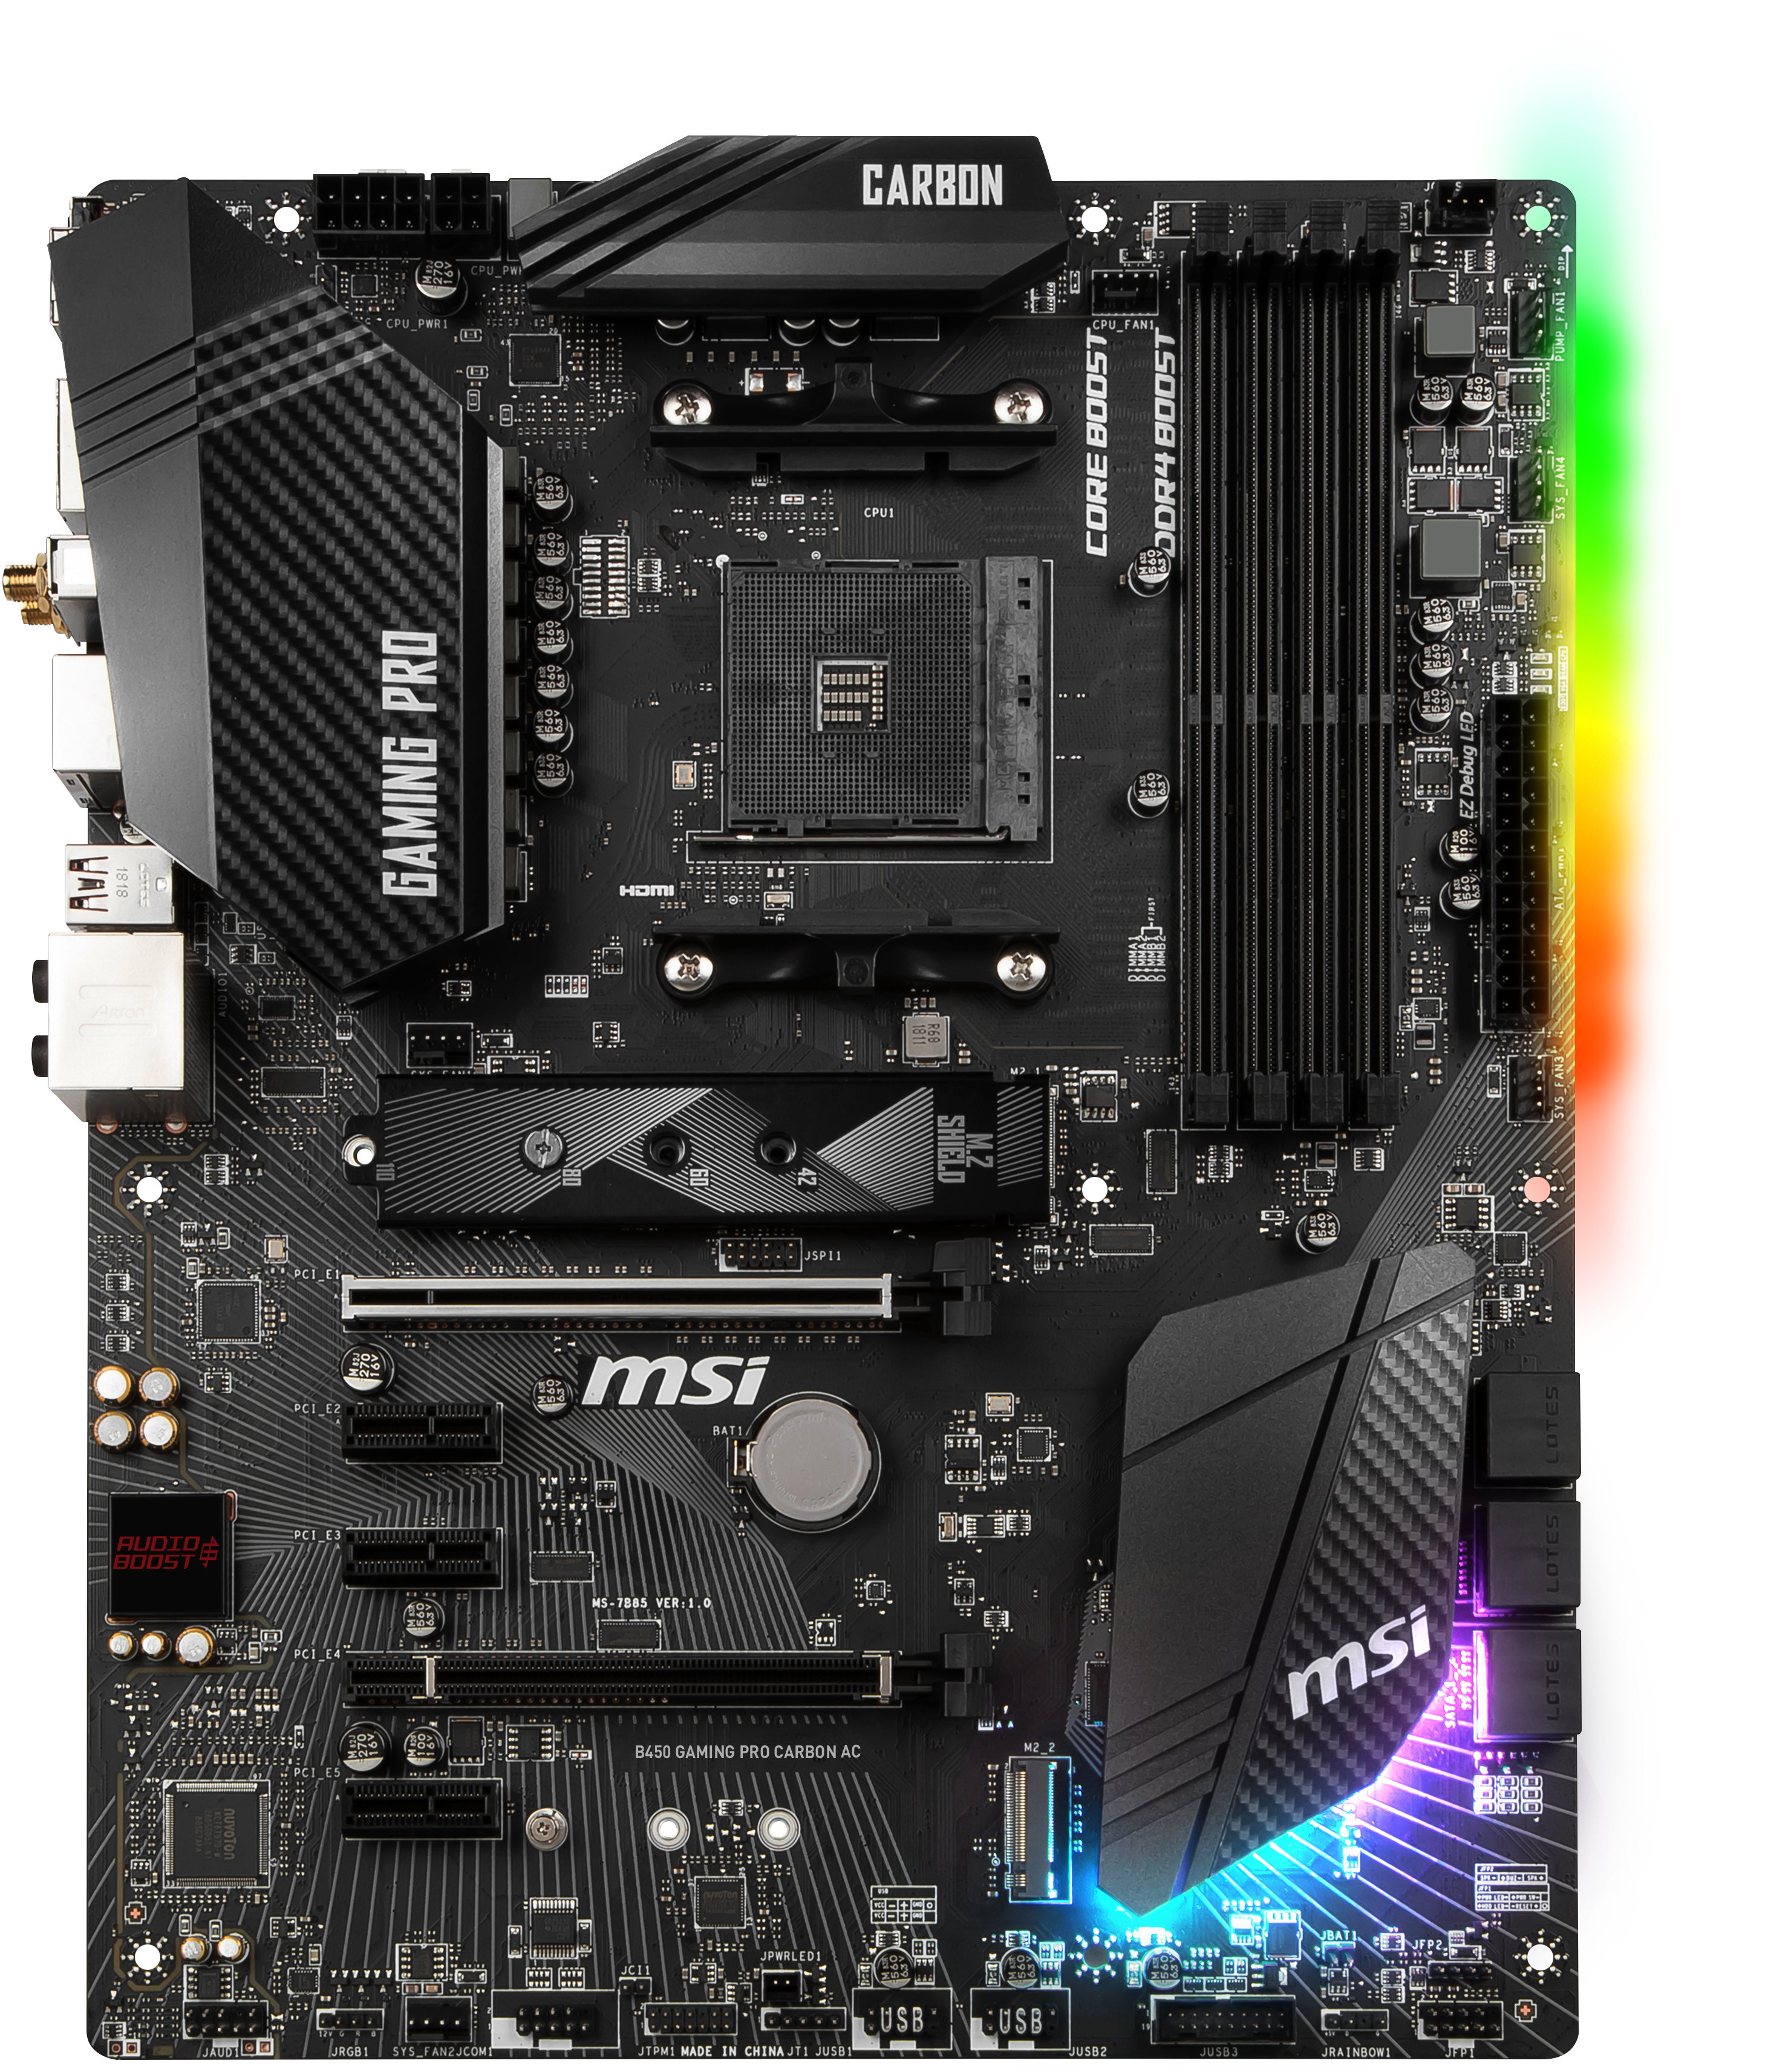 MSI Gaming Pro Carbon AC - Analyzing B450 for AMD Ryzen: A Quick Look at 25+ Motherboards